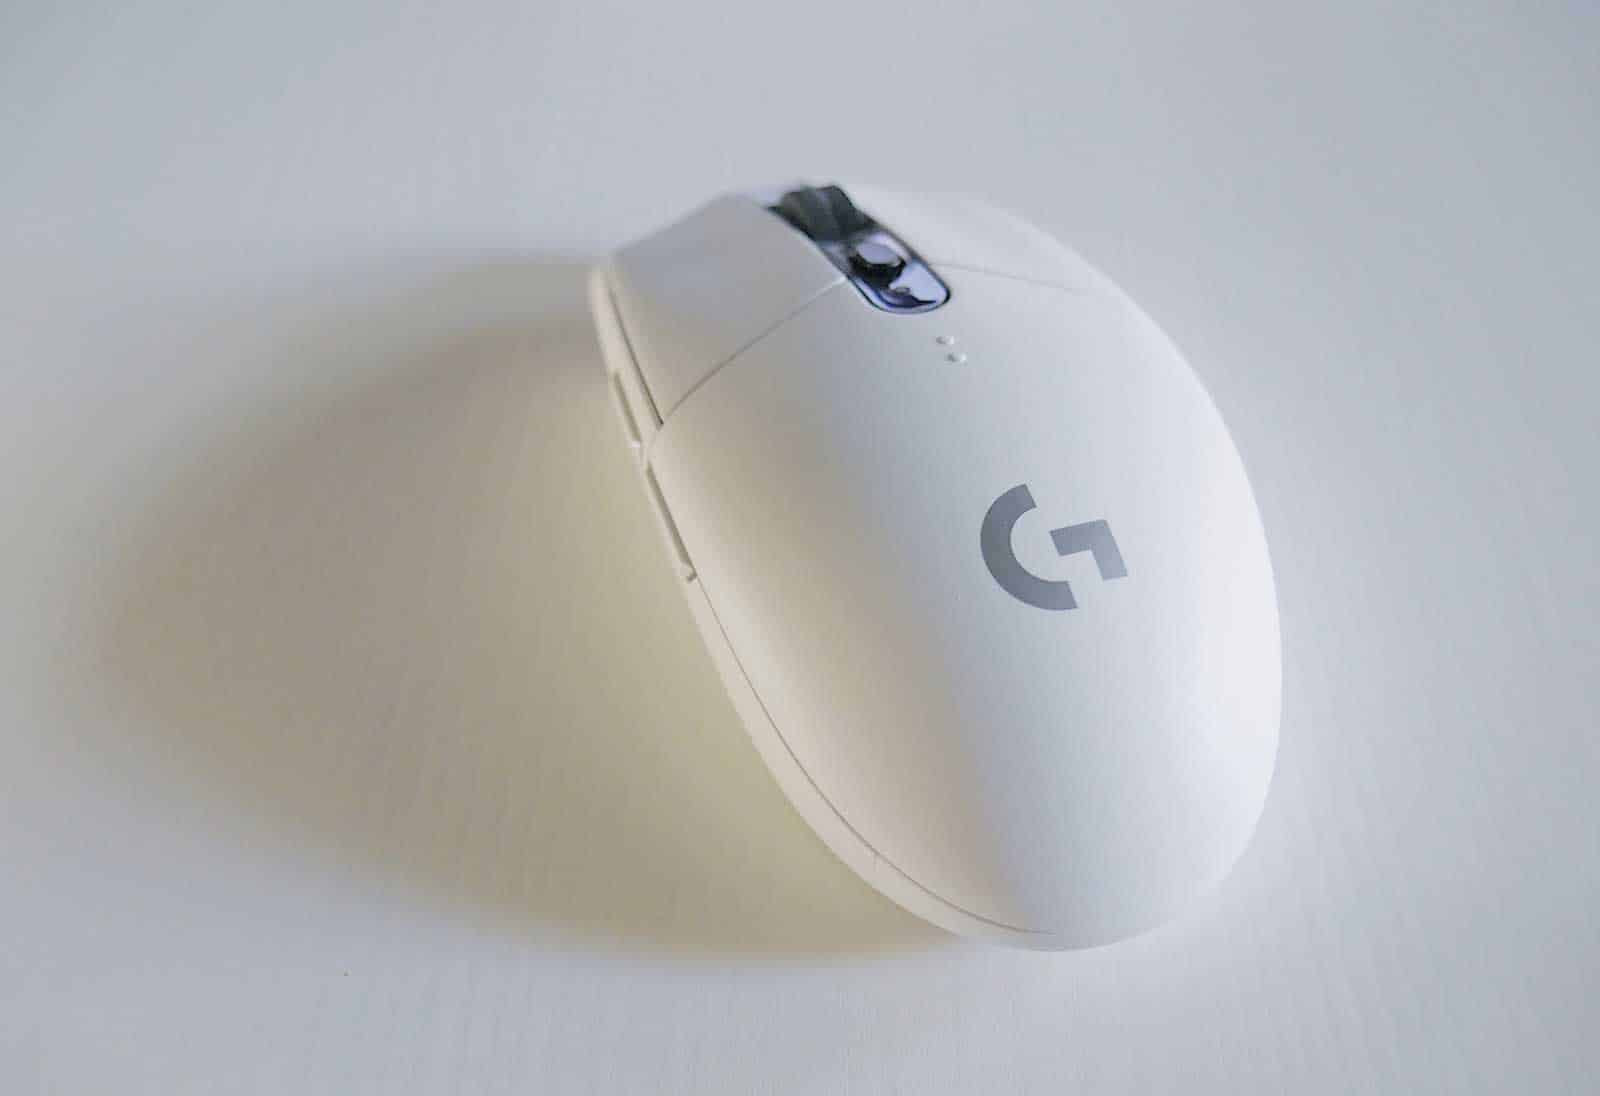 Will A Wireless Mouse Work Through Walls?